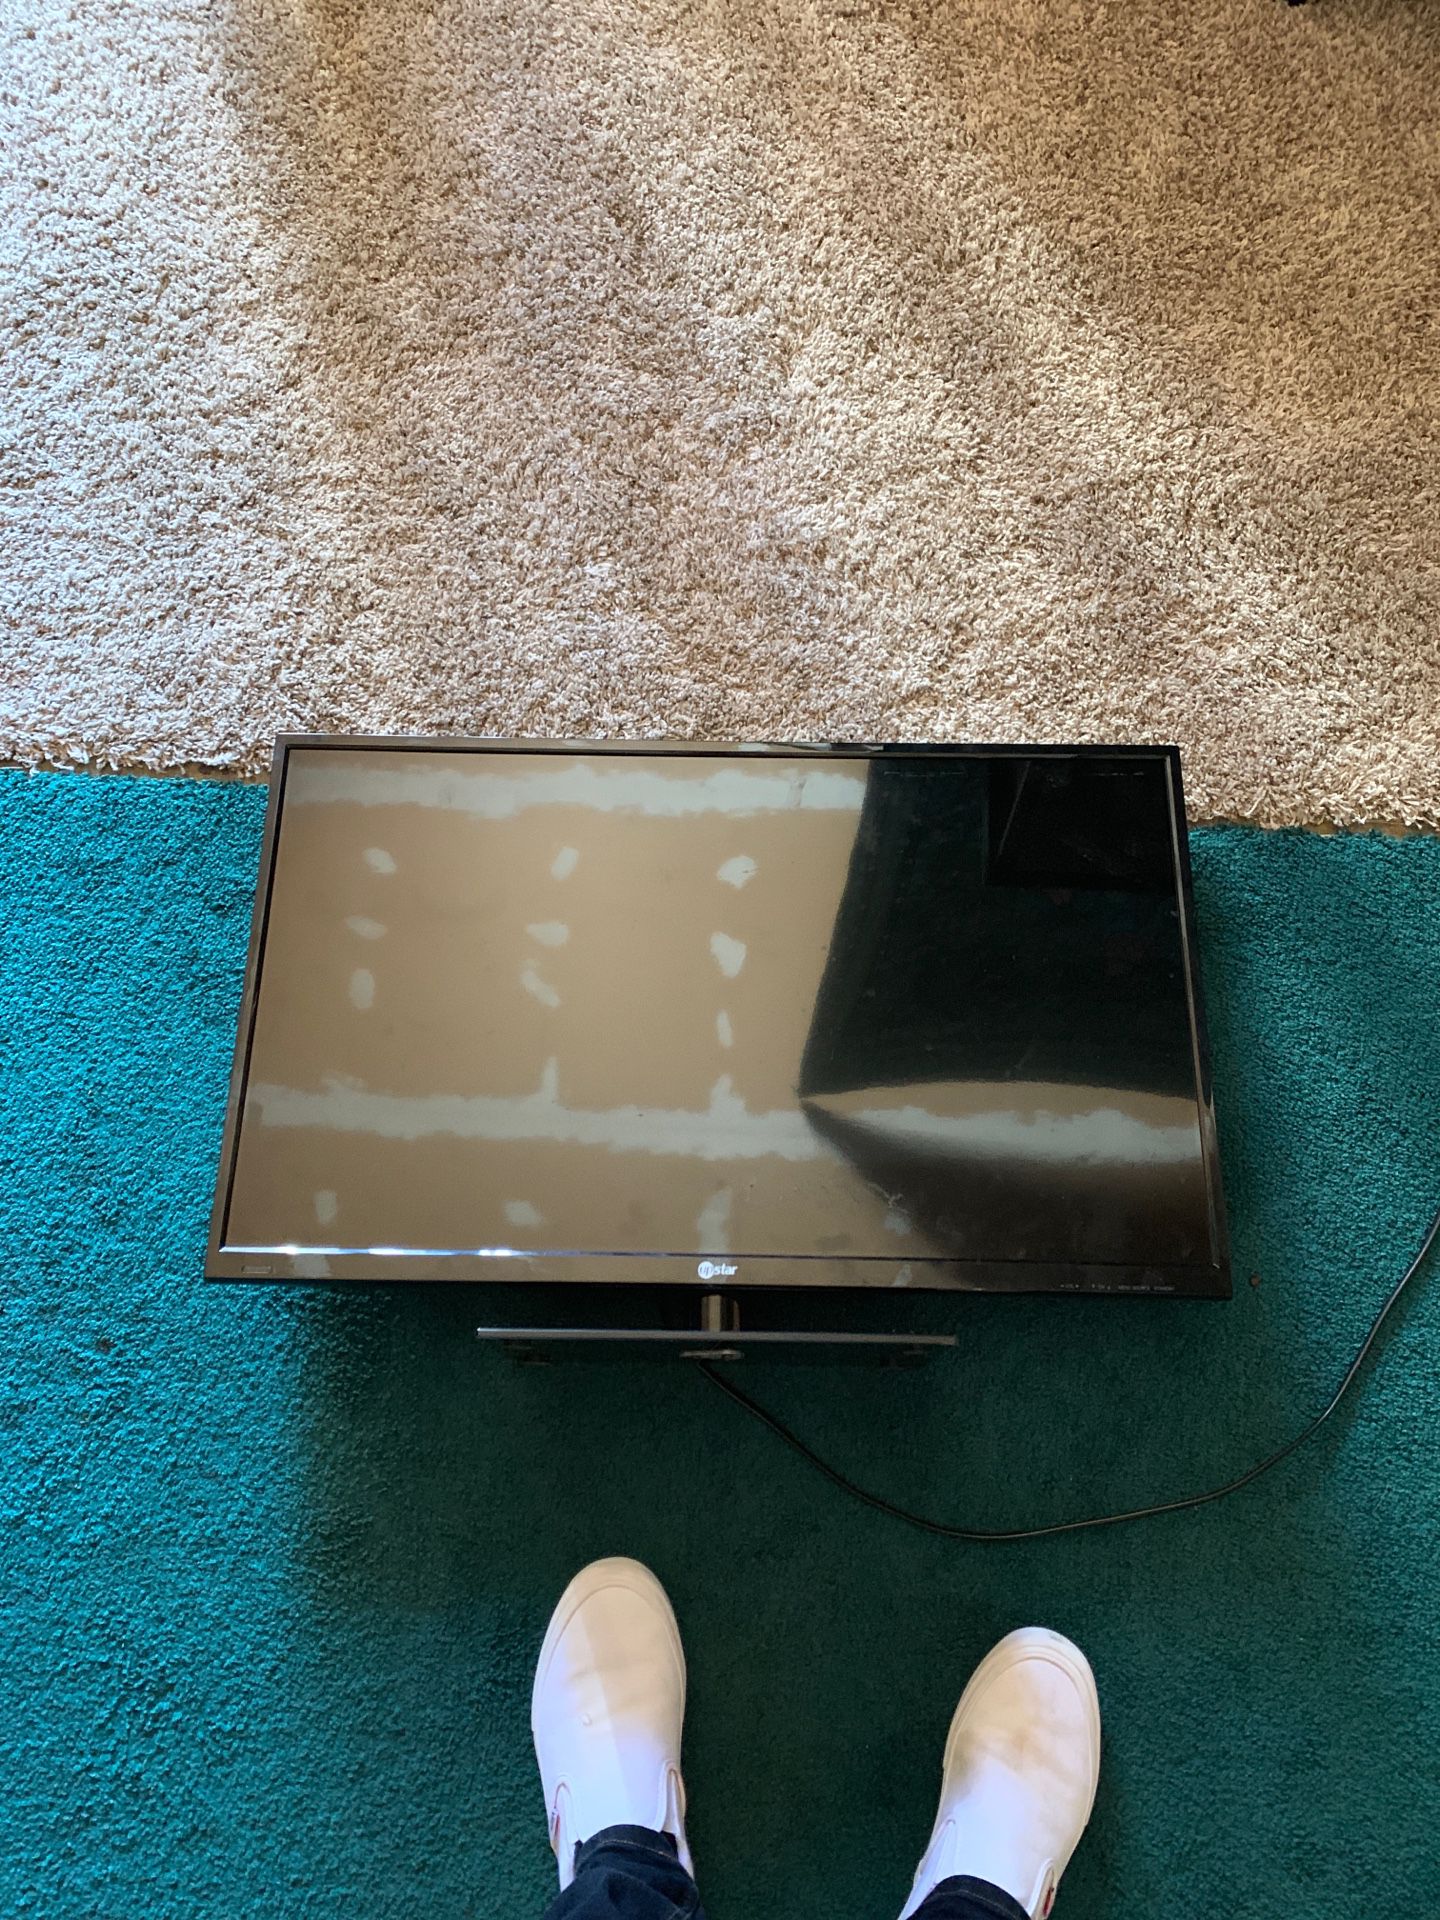 30 in tv works great no remote